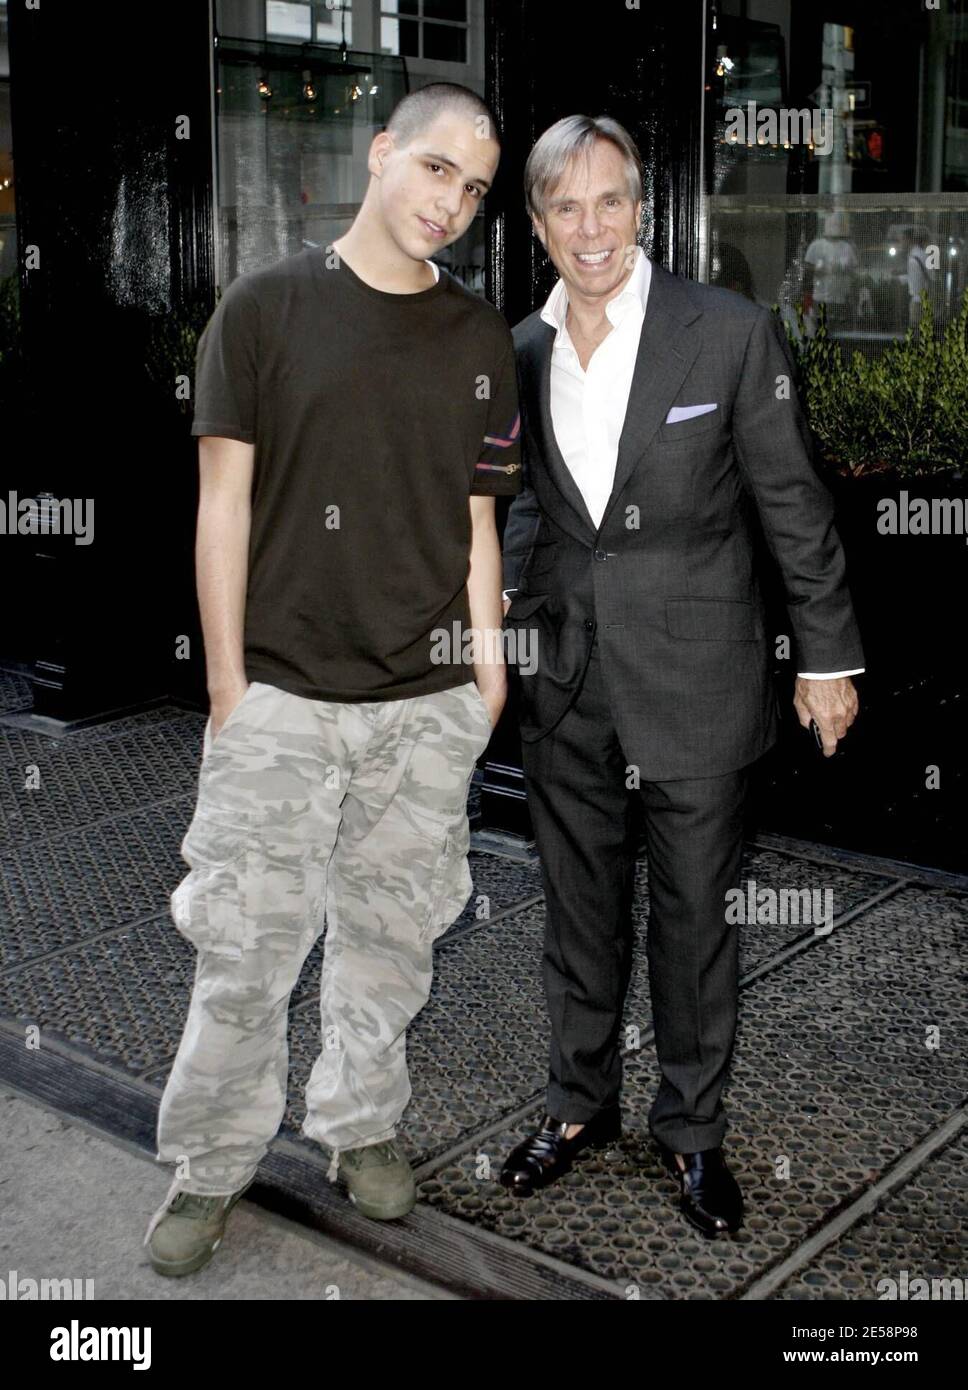 Tommy Hilfiger and son Rich, who co-ceo of Young Rich and Famous Entertainment, make their way back into a hotel in Soho, NY. 10/4/07. [[faa]] Stock Photo - Alamy